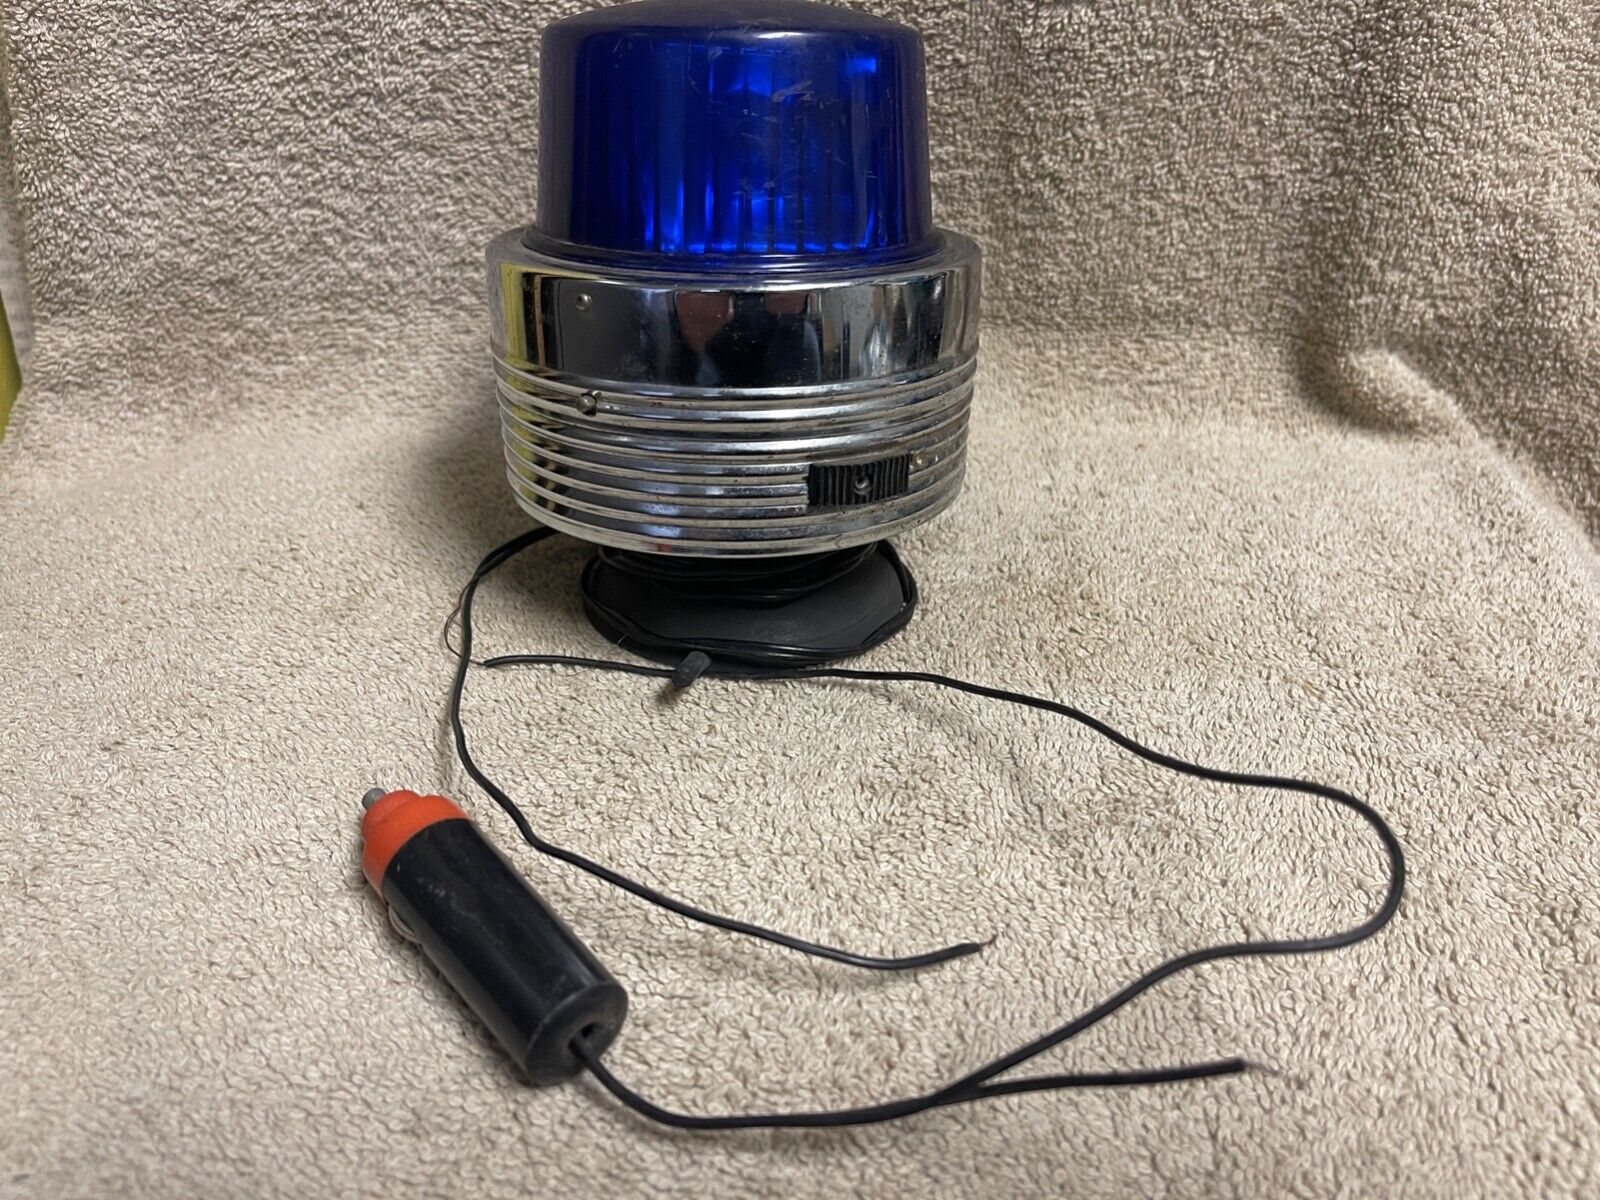 USED AUTO EMERGENCY BLUE FLASHING LIGHT WITH SUCTION CUP 12 VOLT PLUG